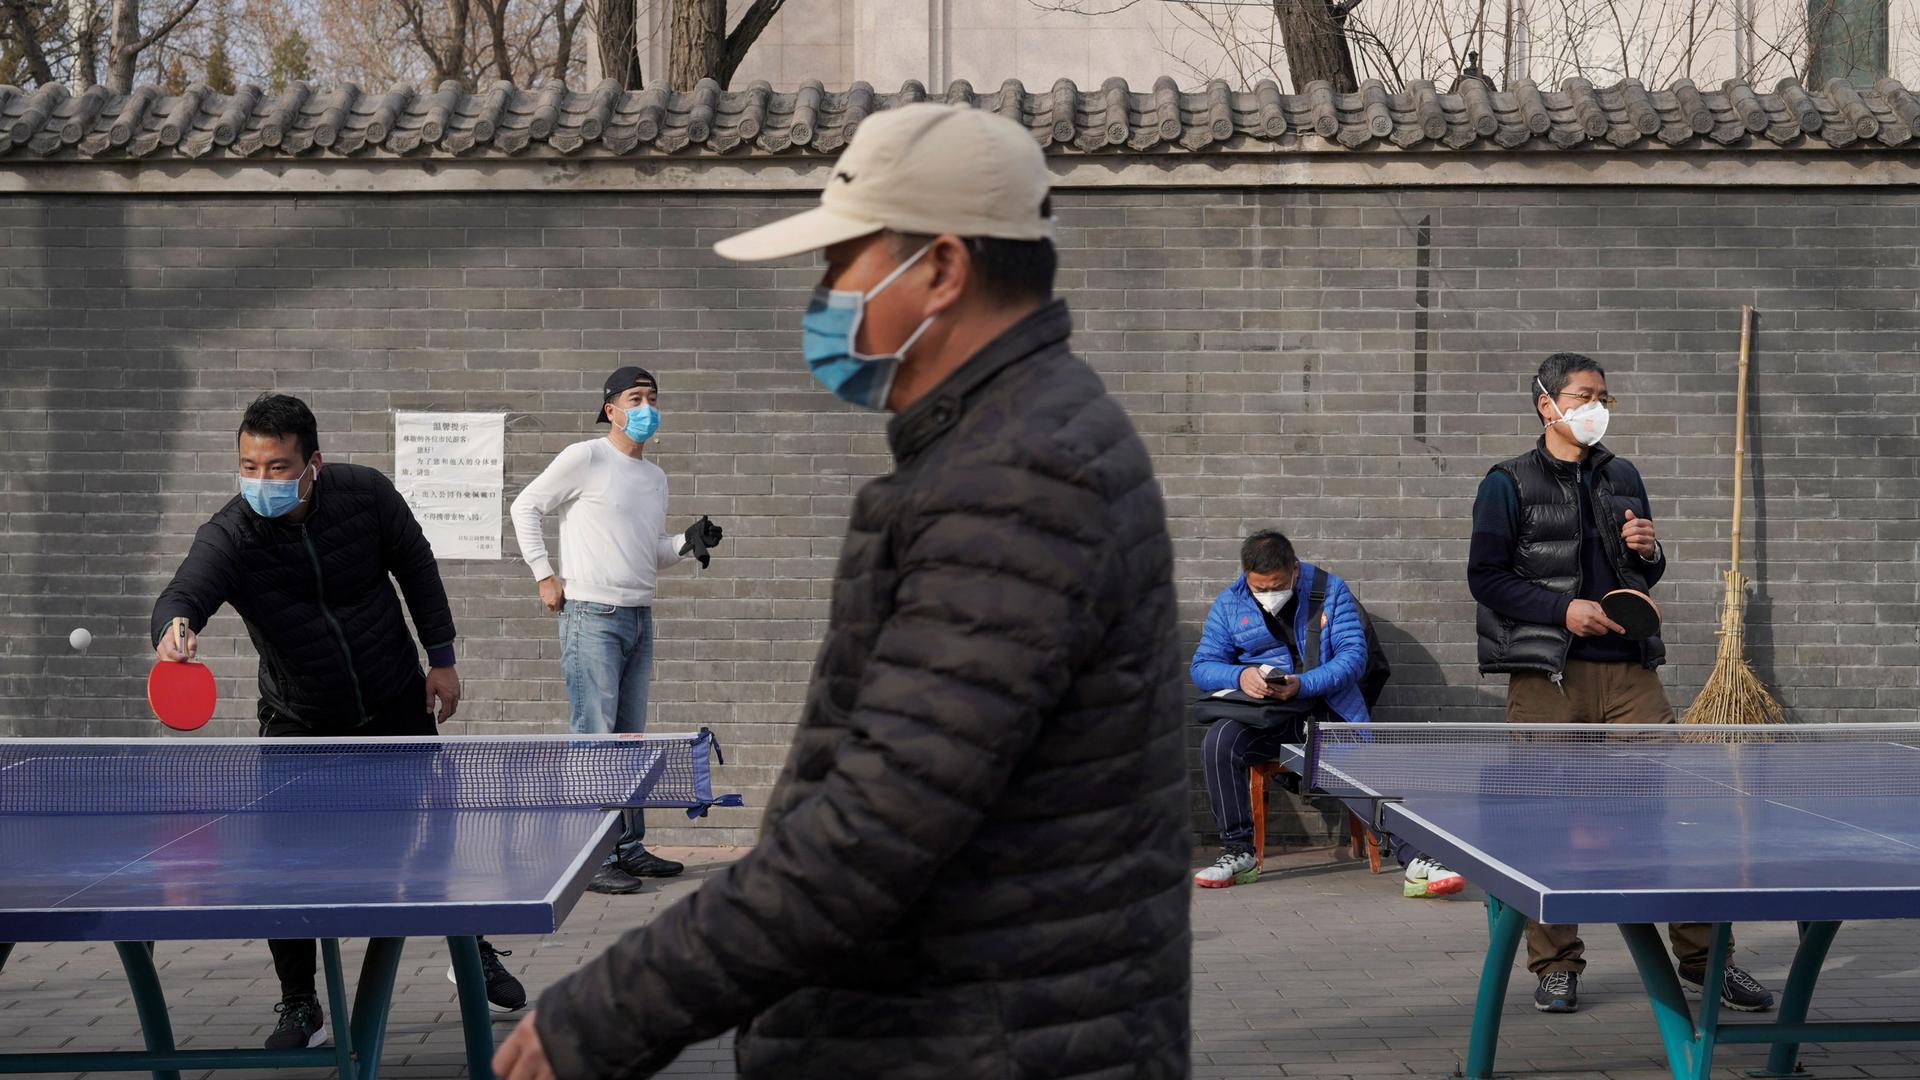 Several people are shown playing table tennis and wearing face masks.